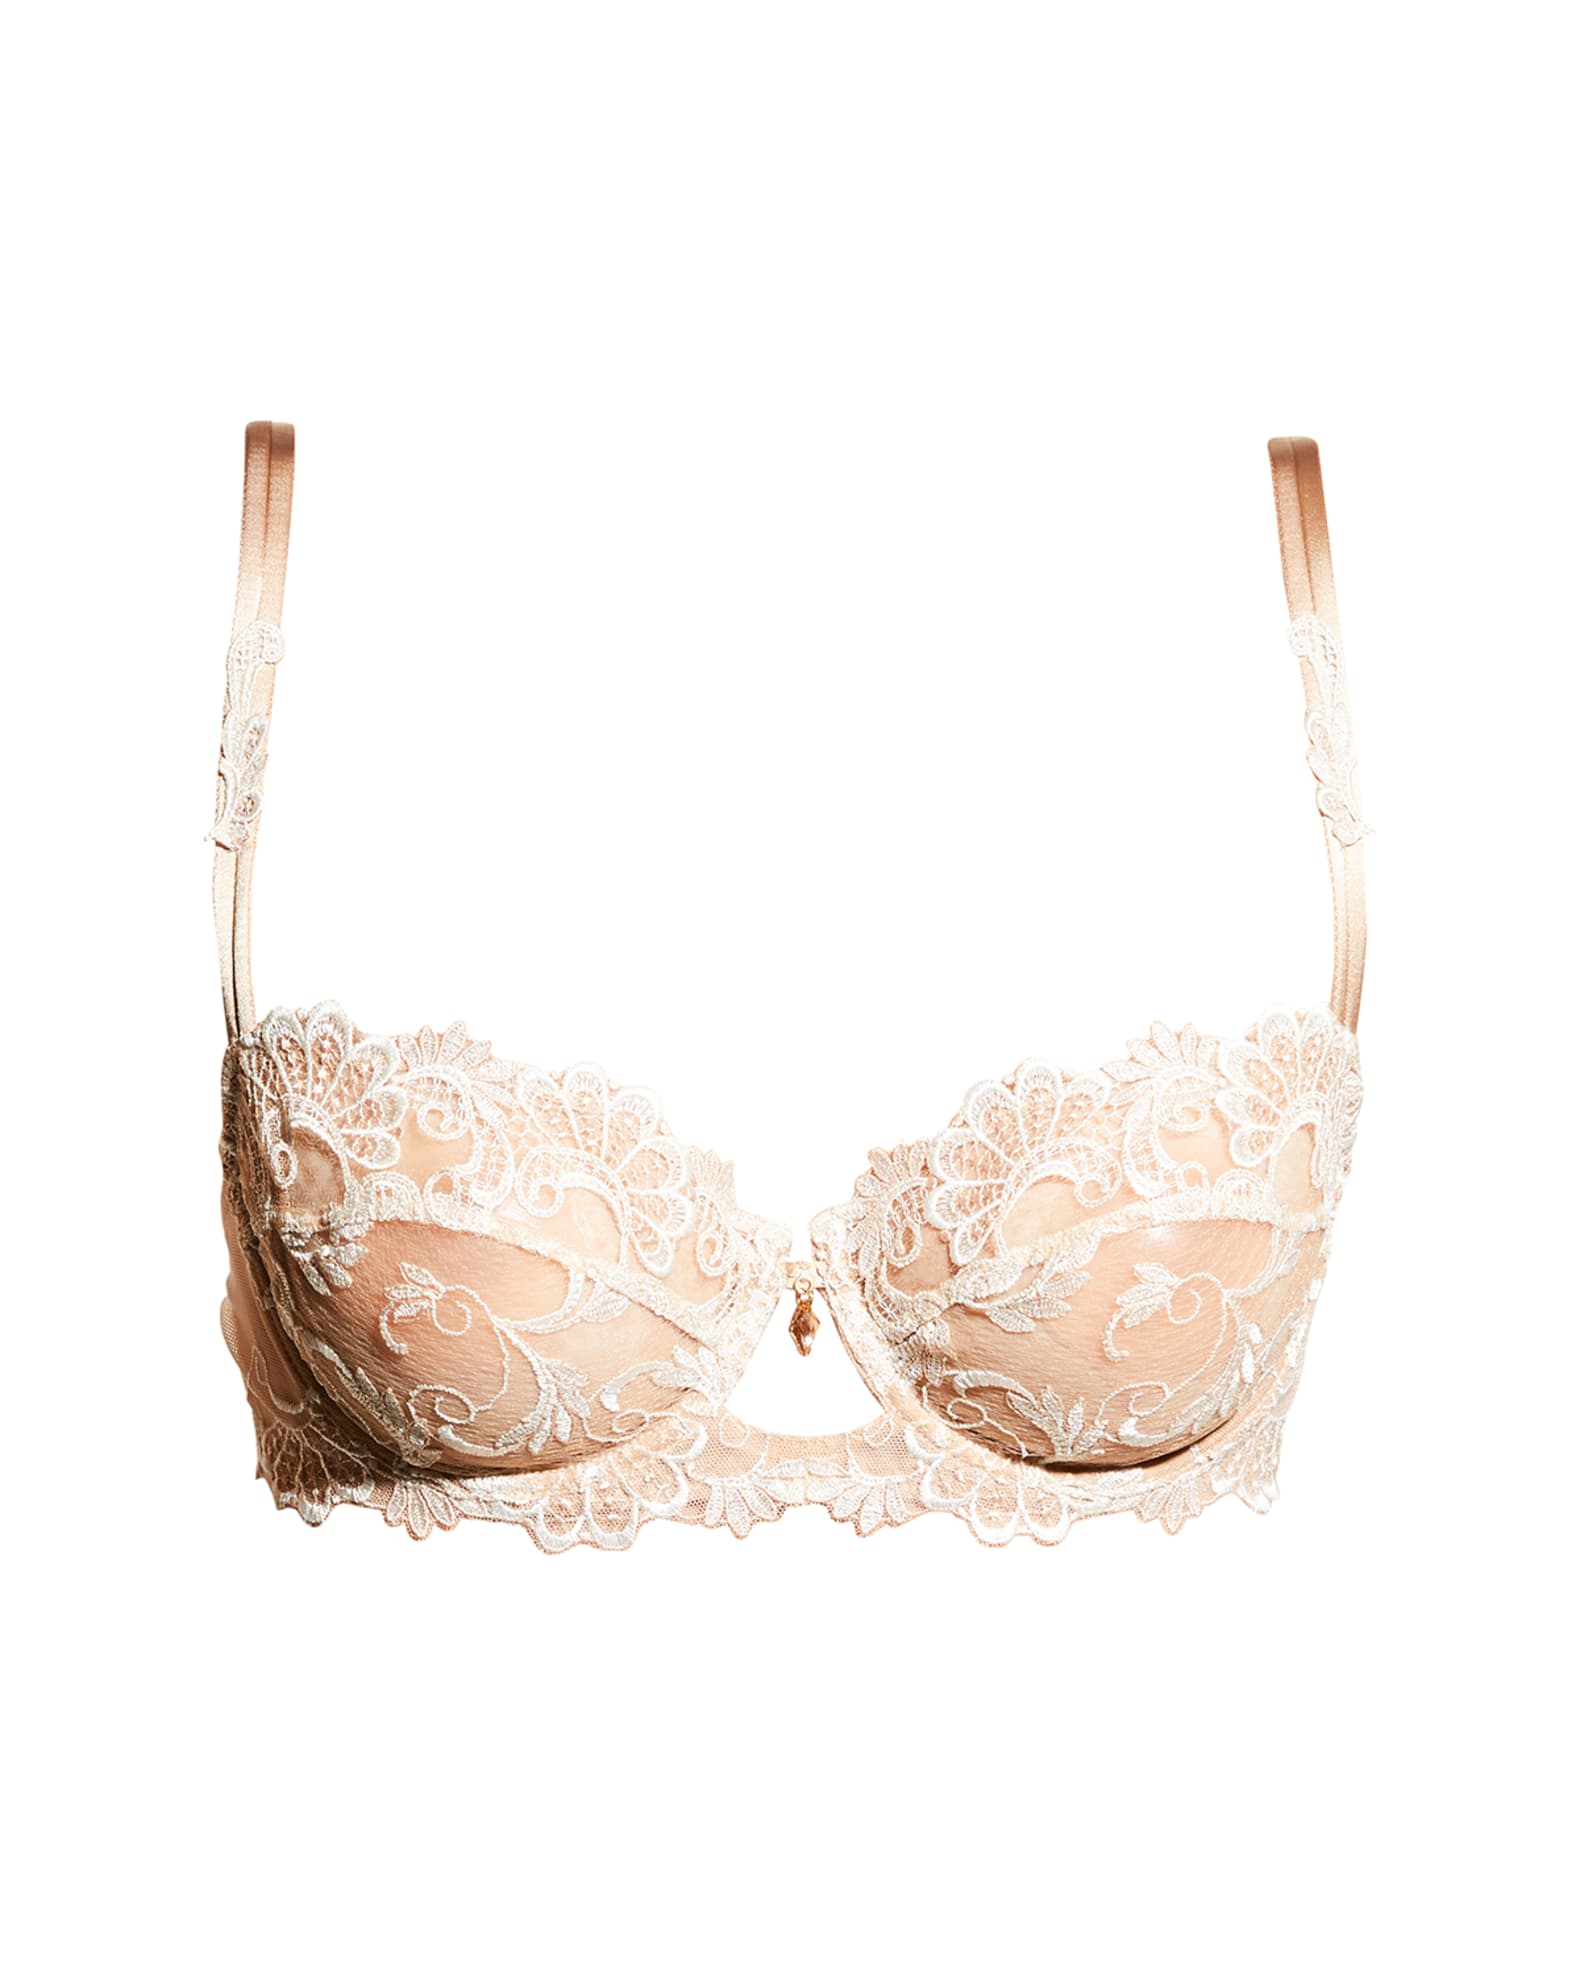 Underwired bra Dressing Floral by Lise Charmel